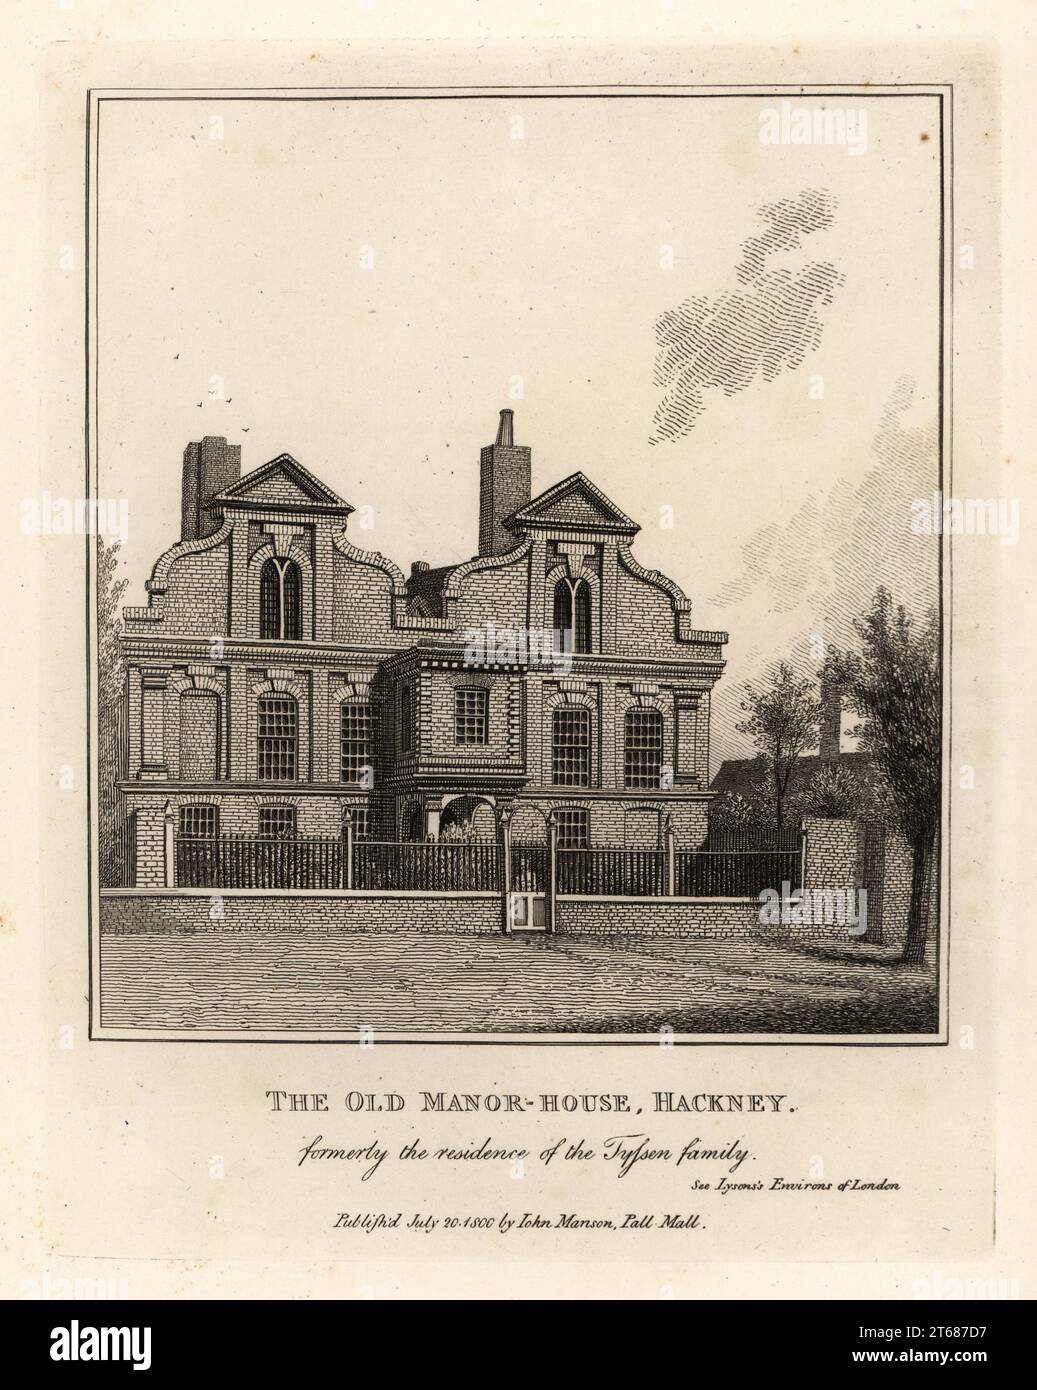 The Old Manor House, Hackney, formerly the residence of the Tyssen family. Copperplate engraving by John Thomas Smith after original drawings by members of the Society of Antiquaries from his J.T. Smiths Antiquities of London and its Environs, J. Sewell, R. Folder, J. Simco, London, 1800. Stock Photo